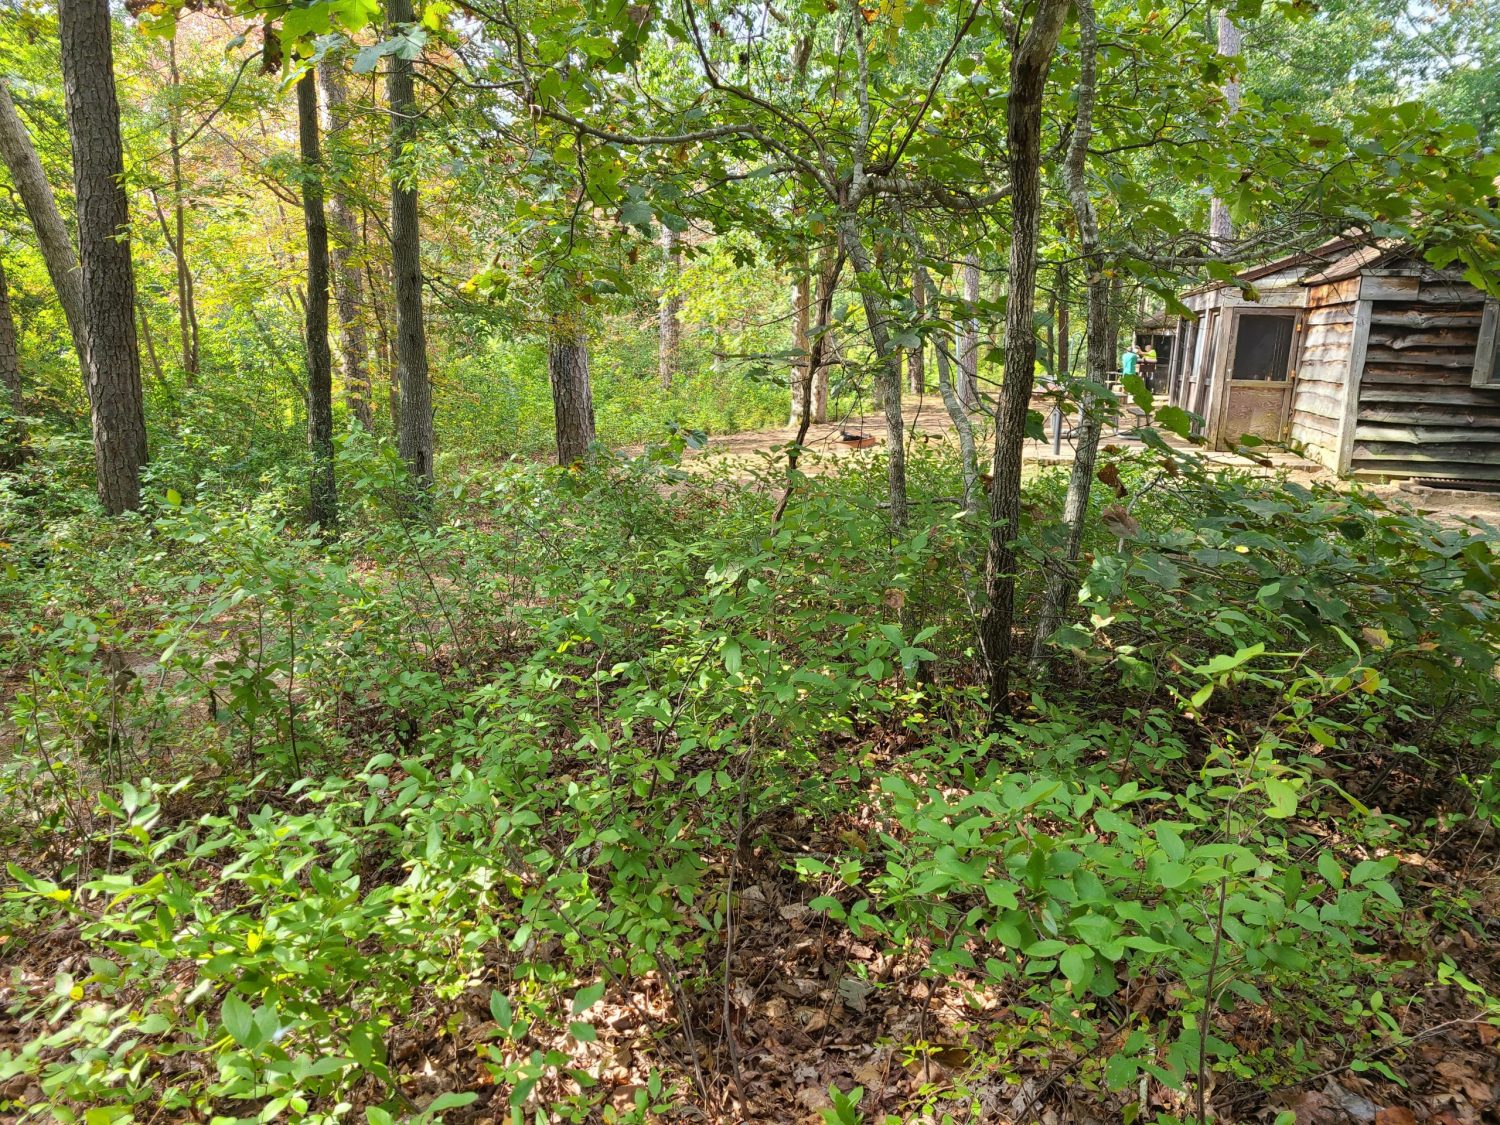 cabin on the far right in a dense wooded area